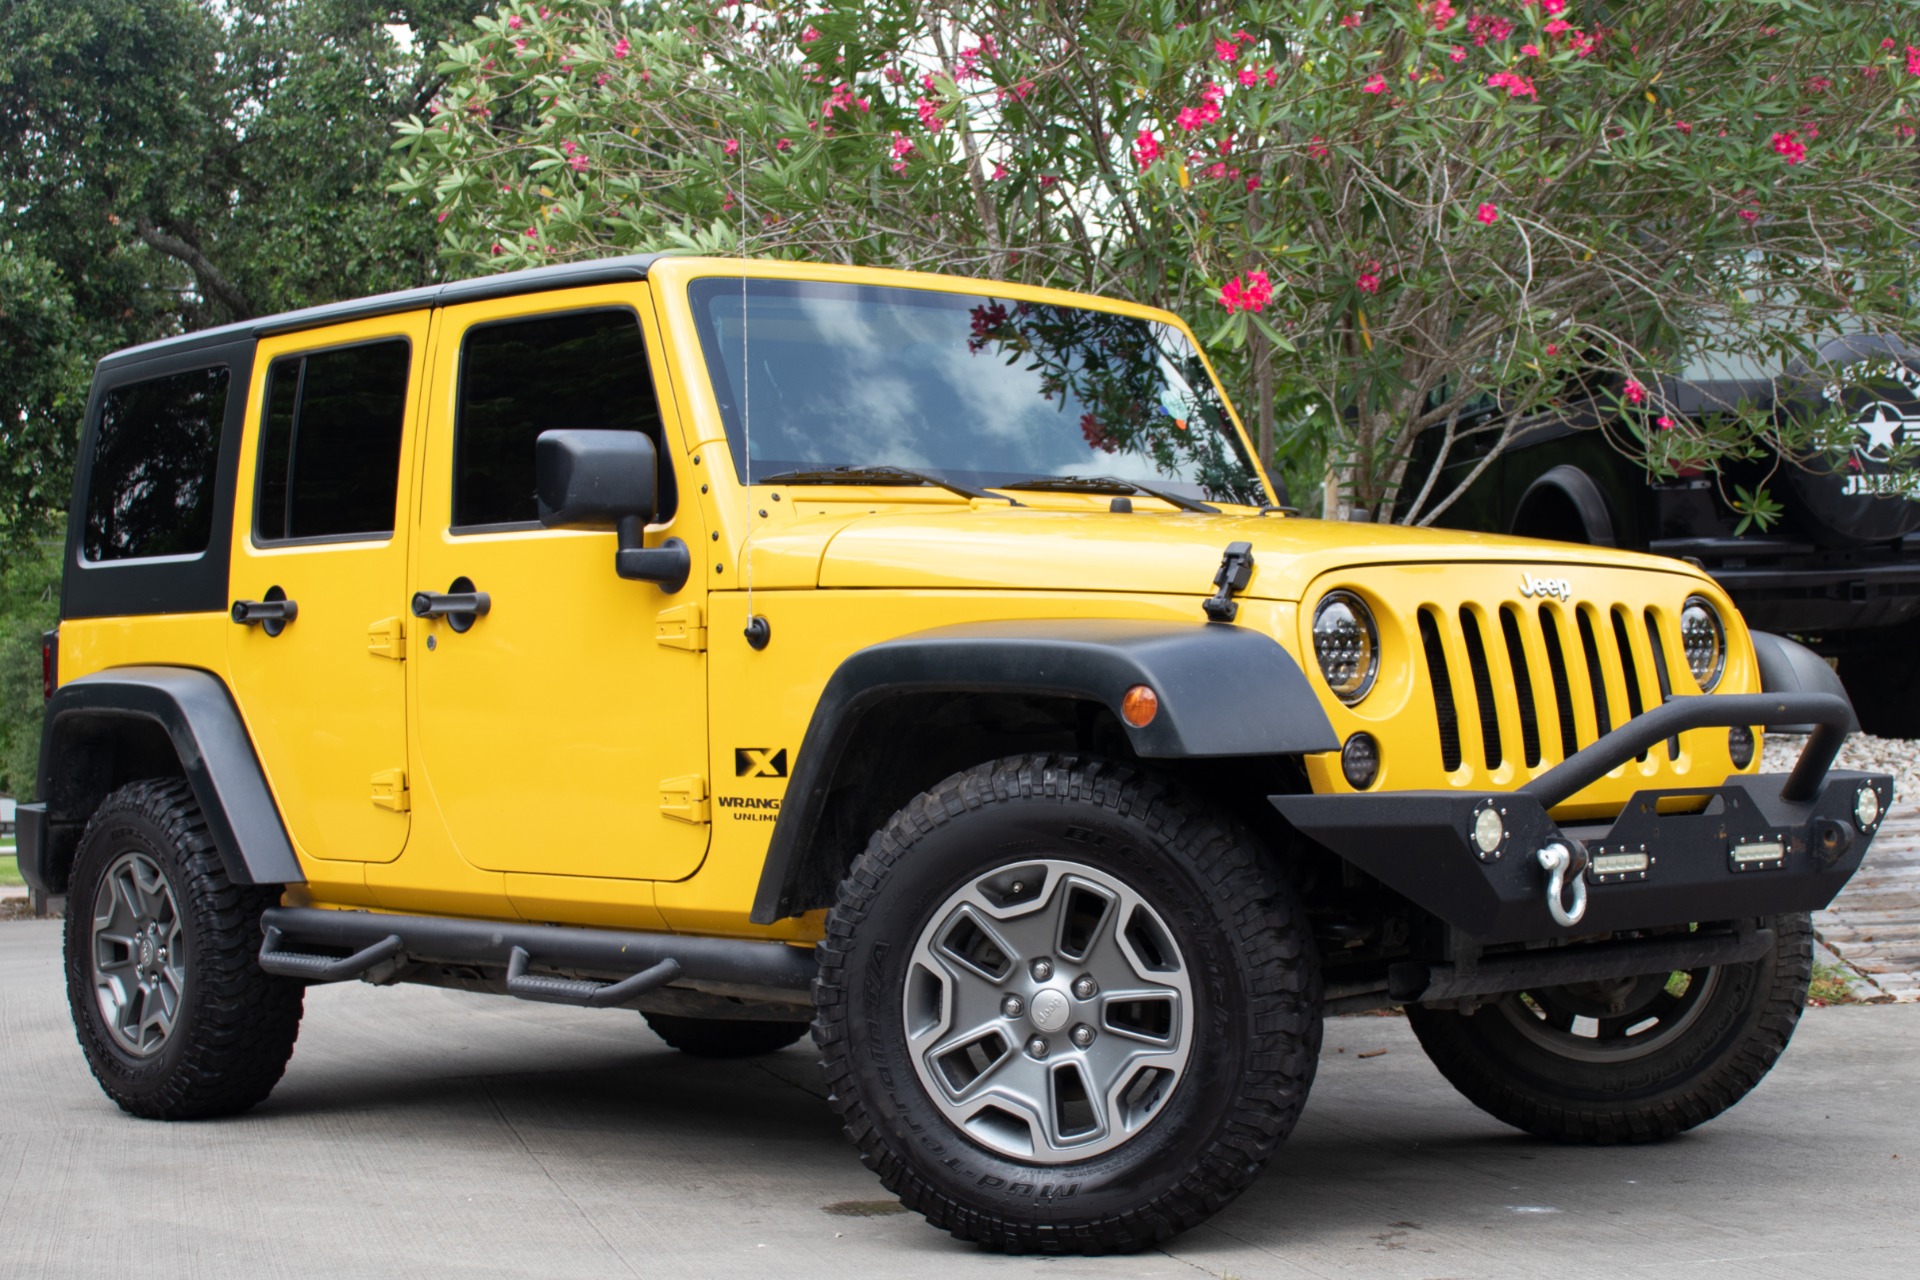 Used 2008 Jeep Wrangler Unlimited X  For Sale 16 995 